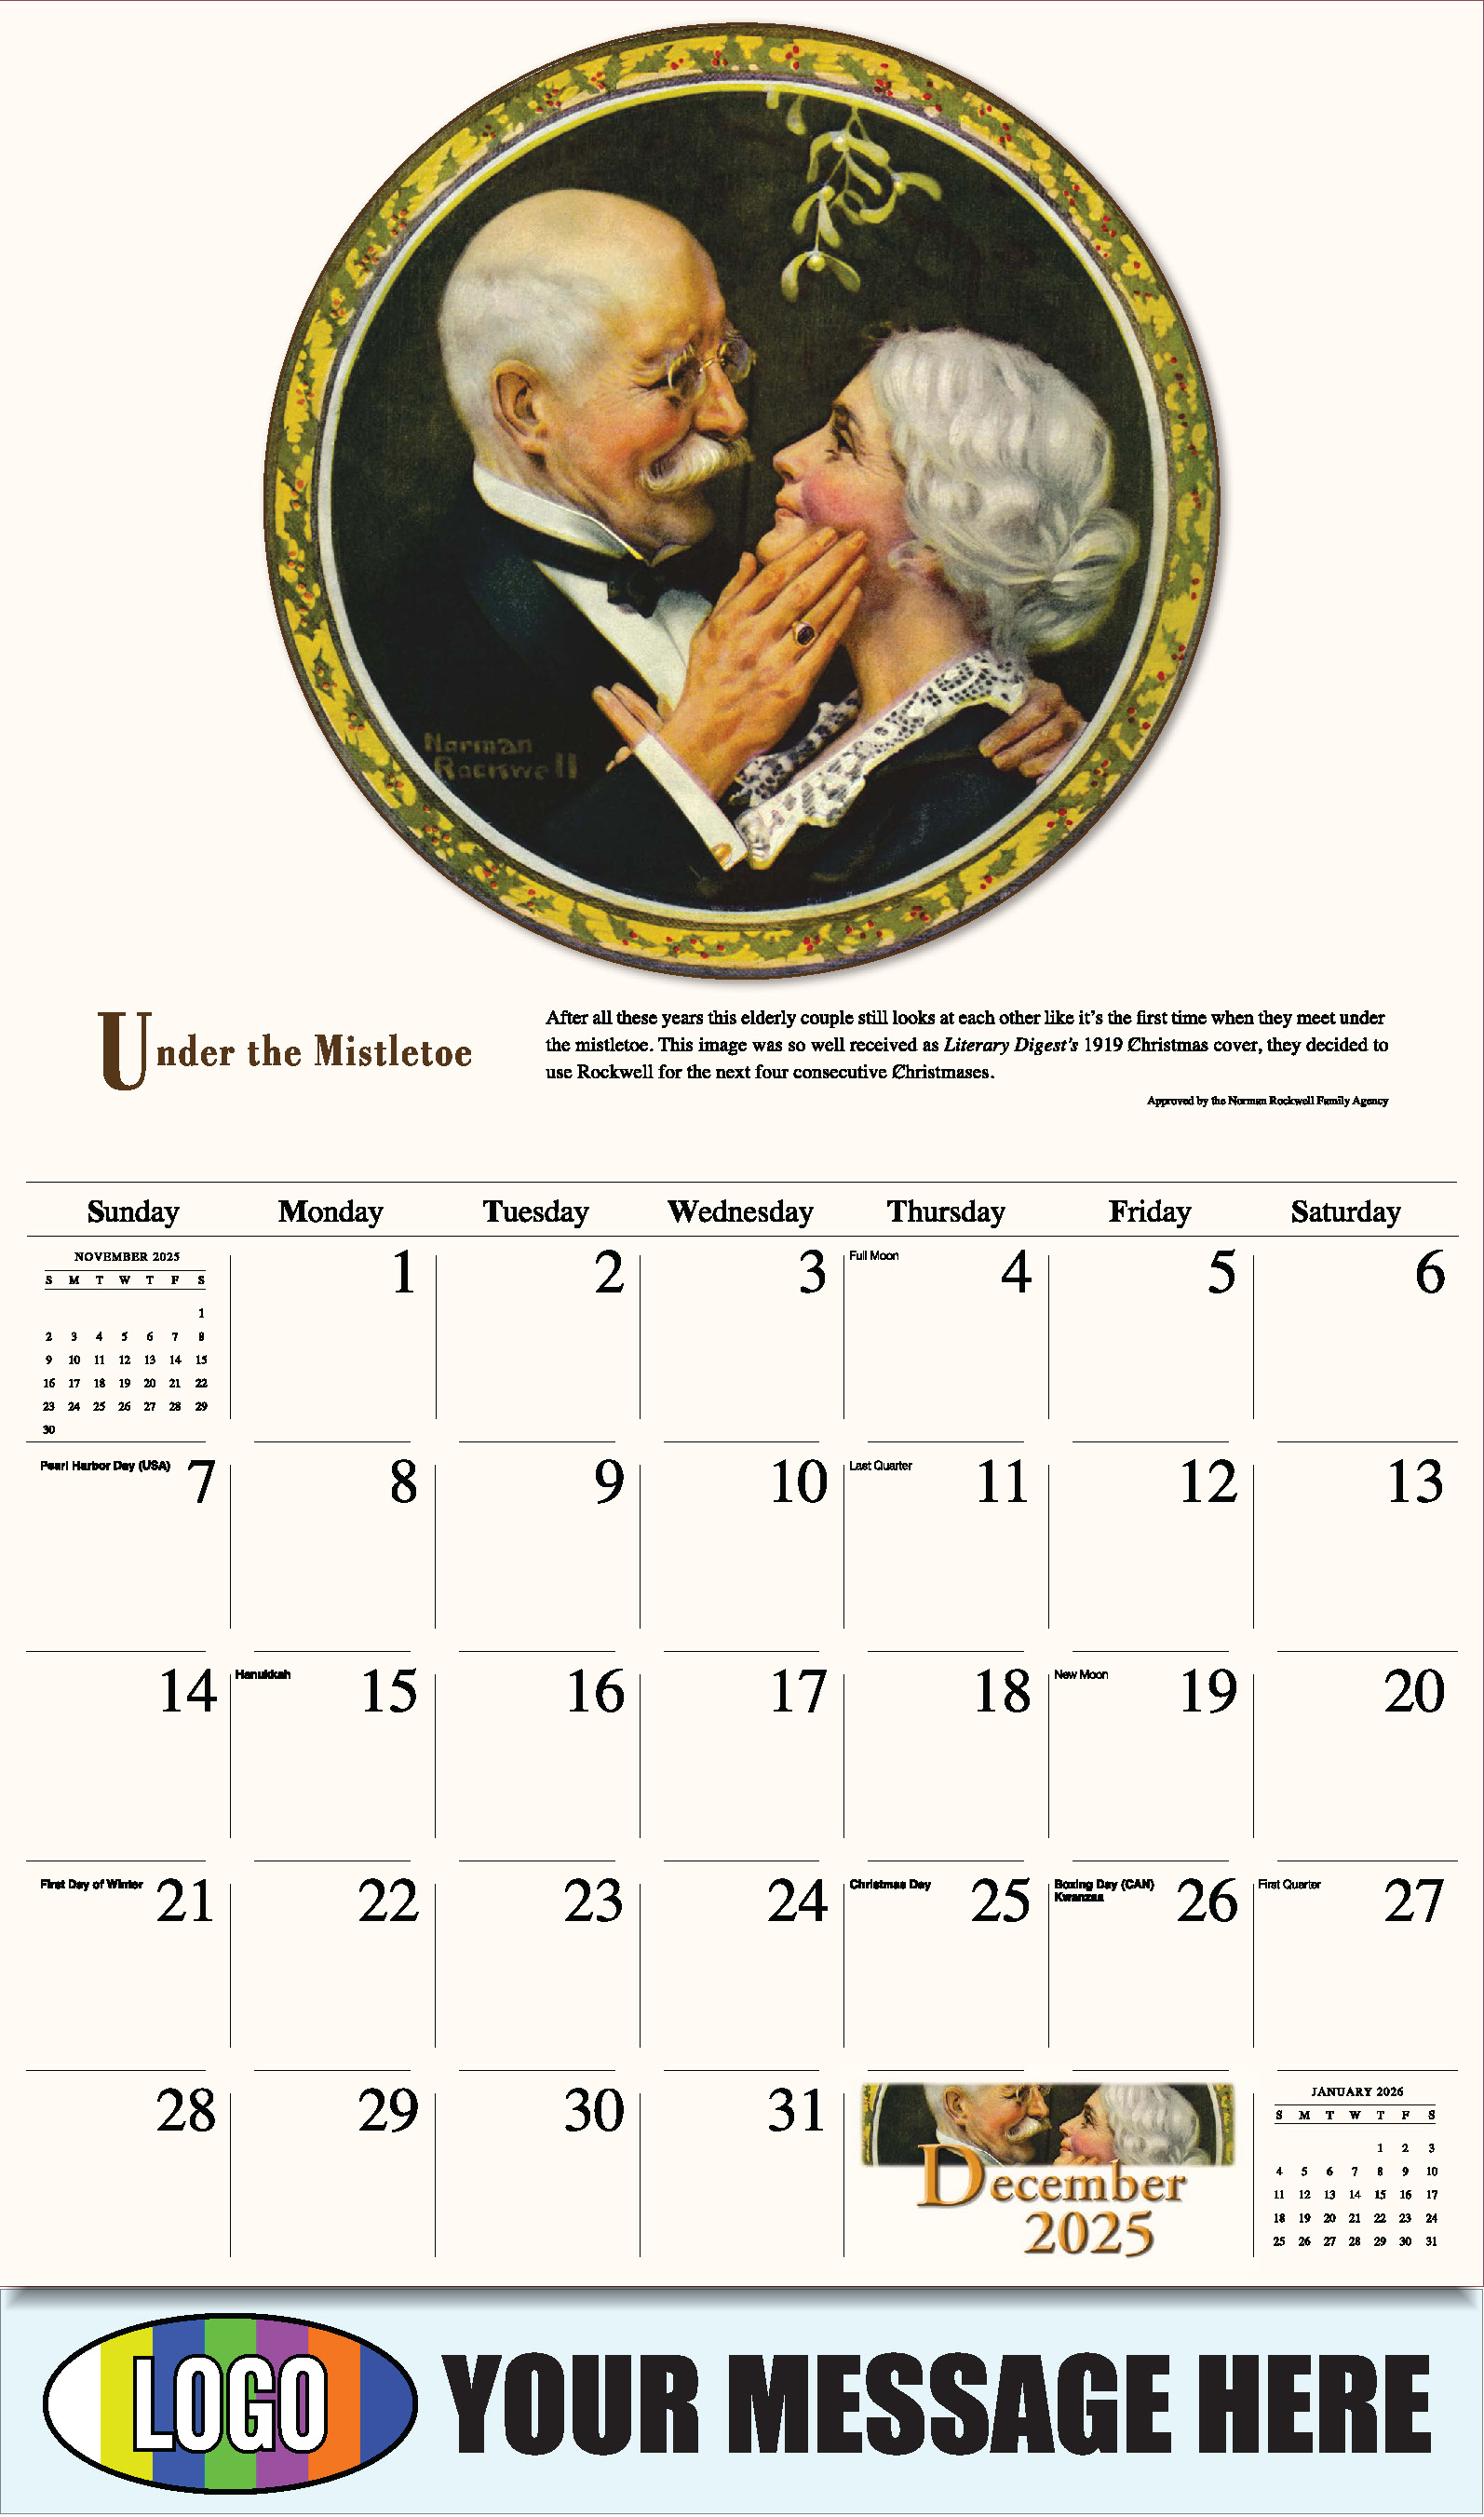 Memorable Images by Norman Rockwell 2025 Business Promotional Wall Calendar - December